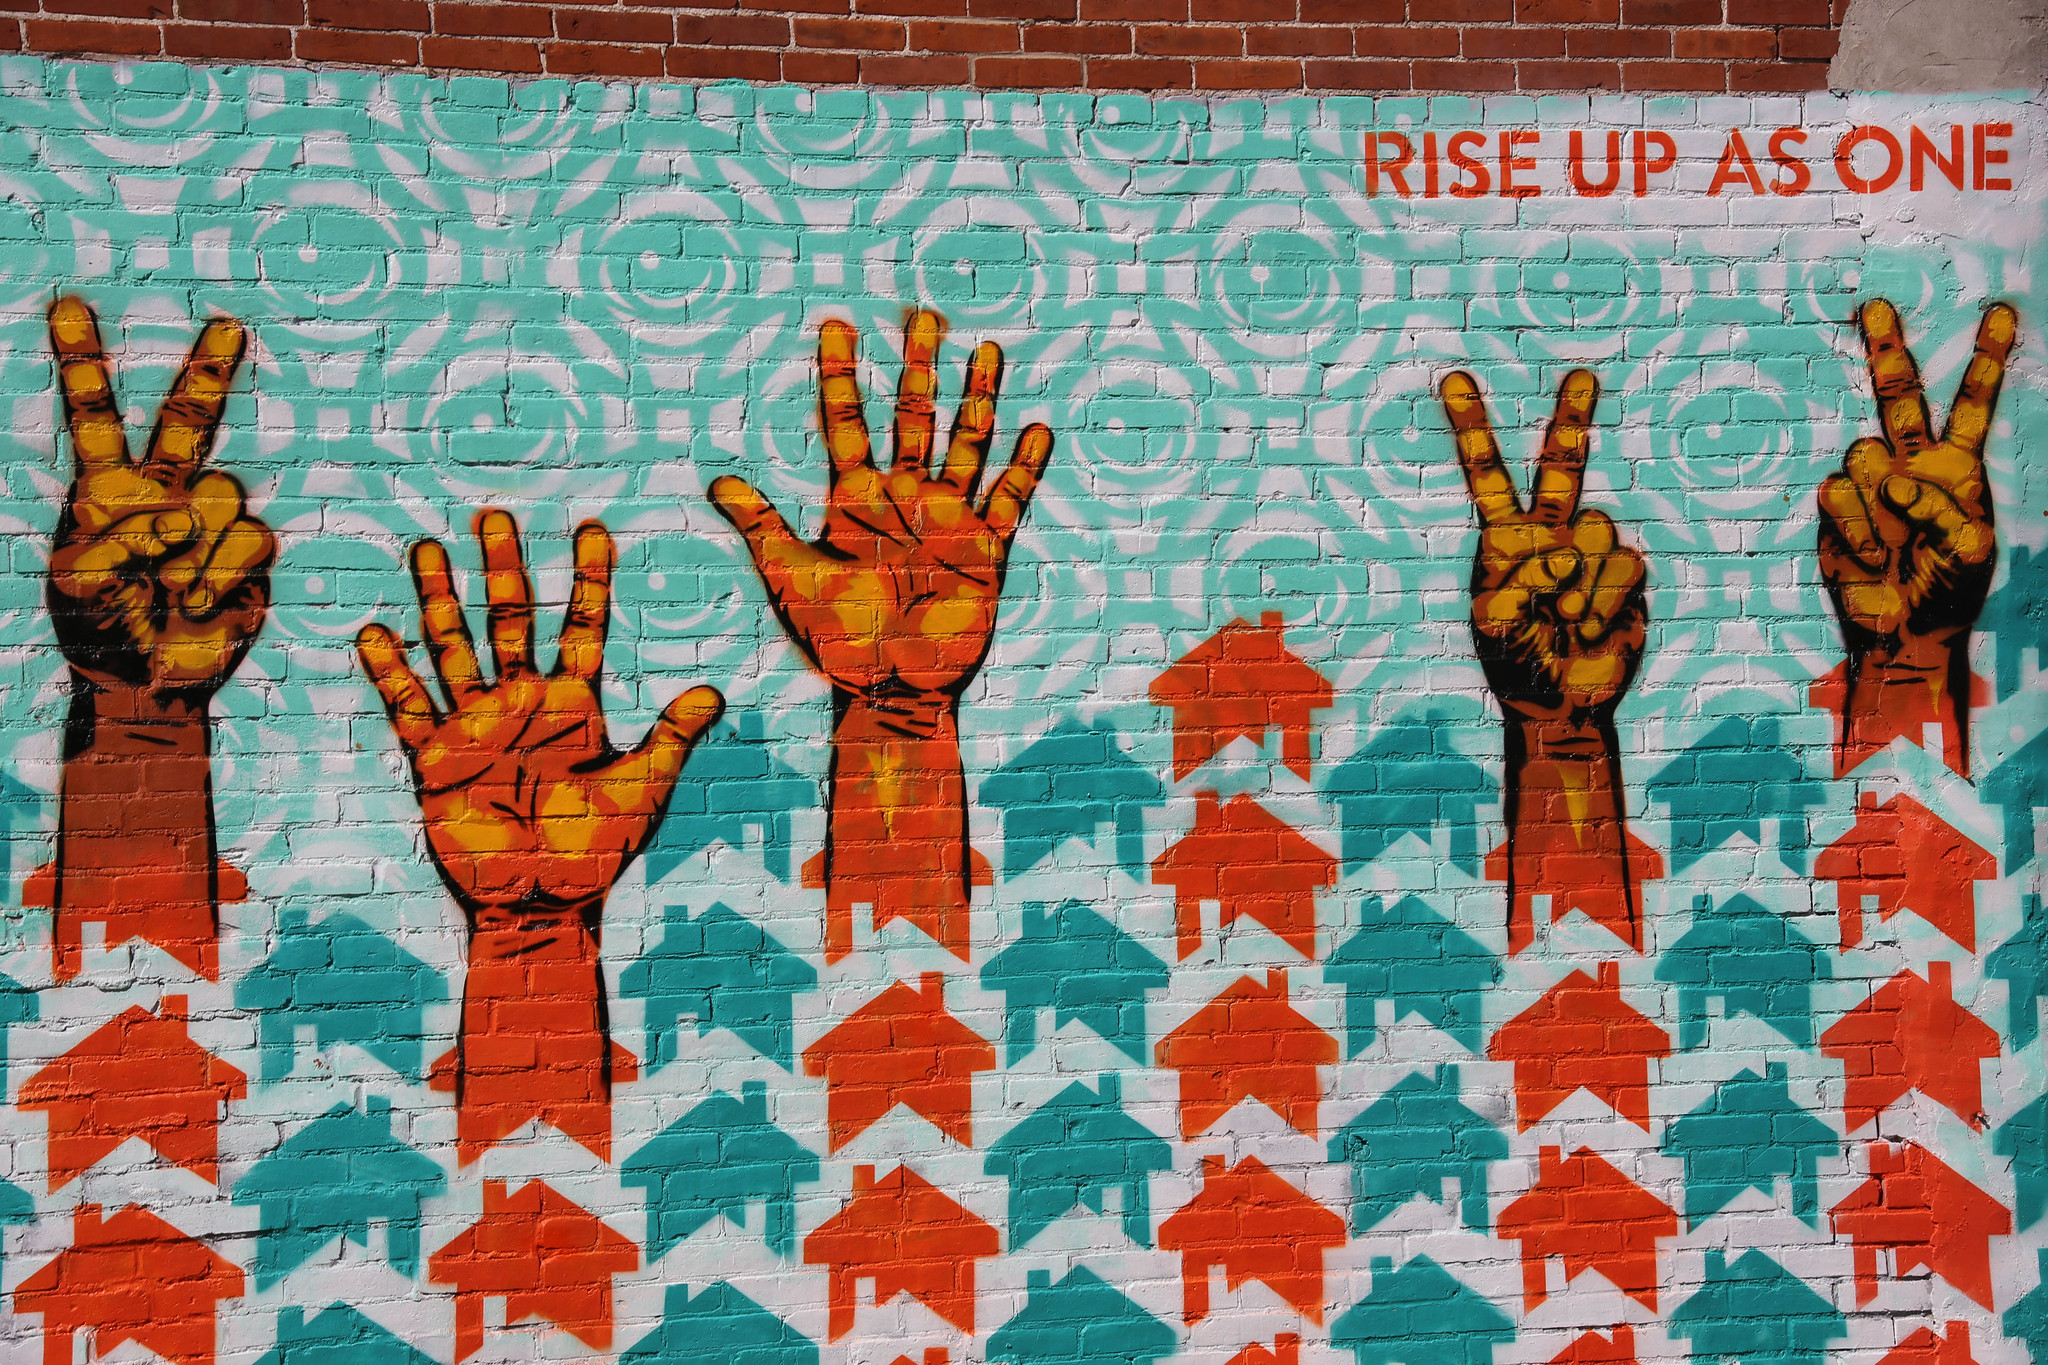 'Rise Up As One' mural in Old North St. Louis.